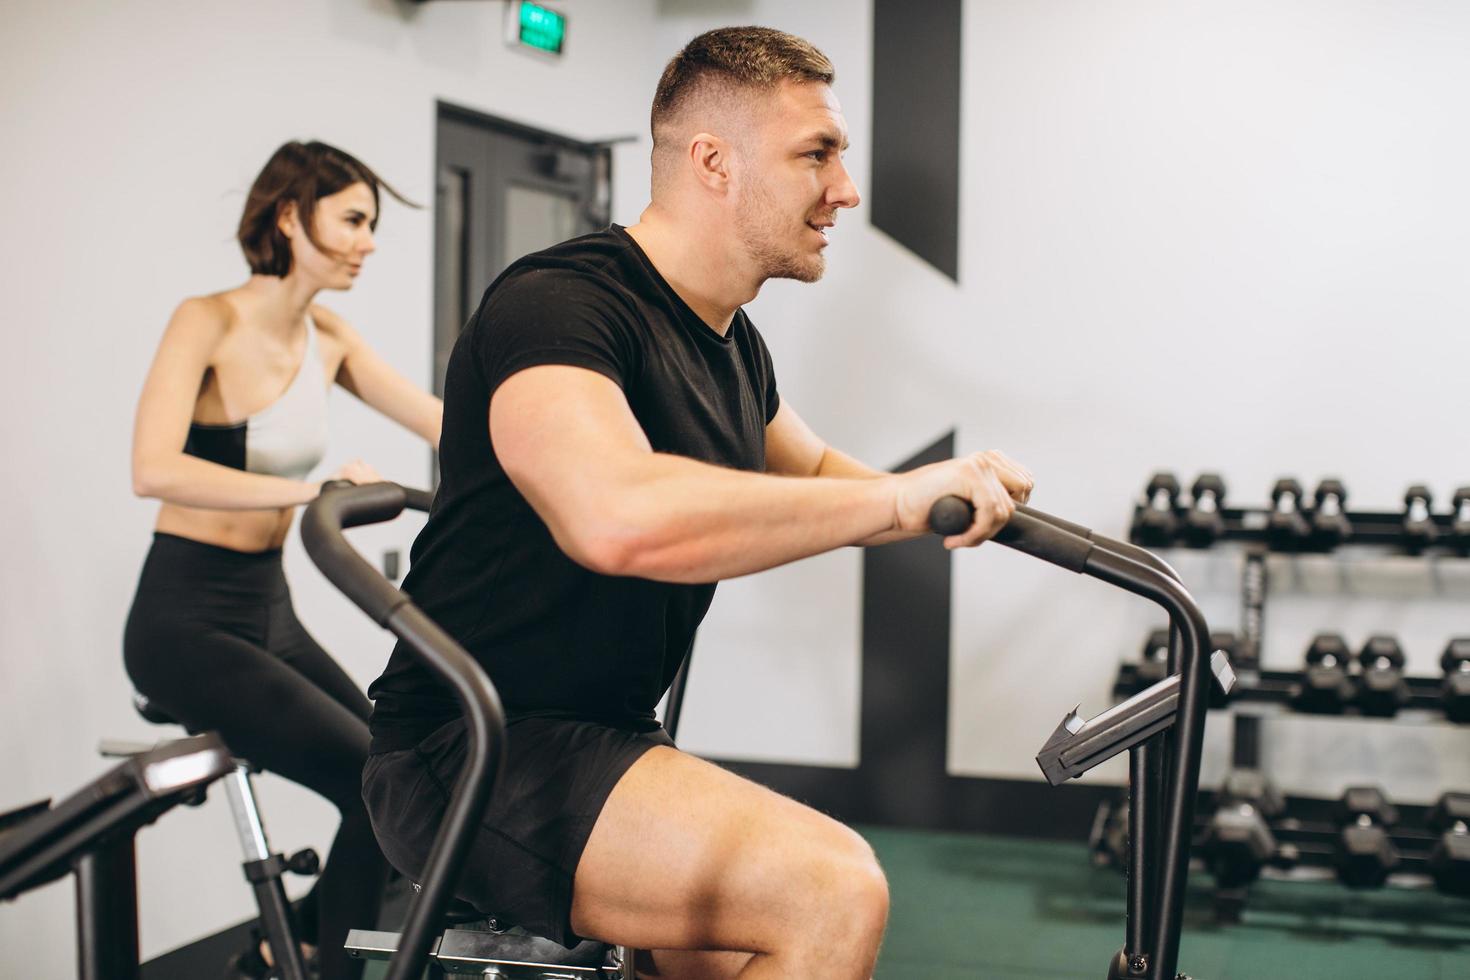 Young man and woman using air bike for cardio workout at cross training gym photo